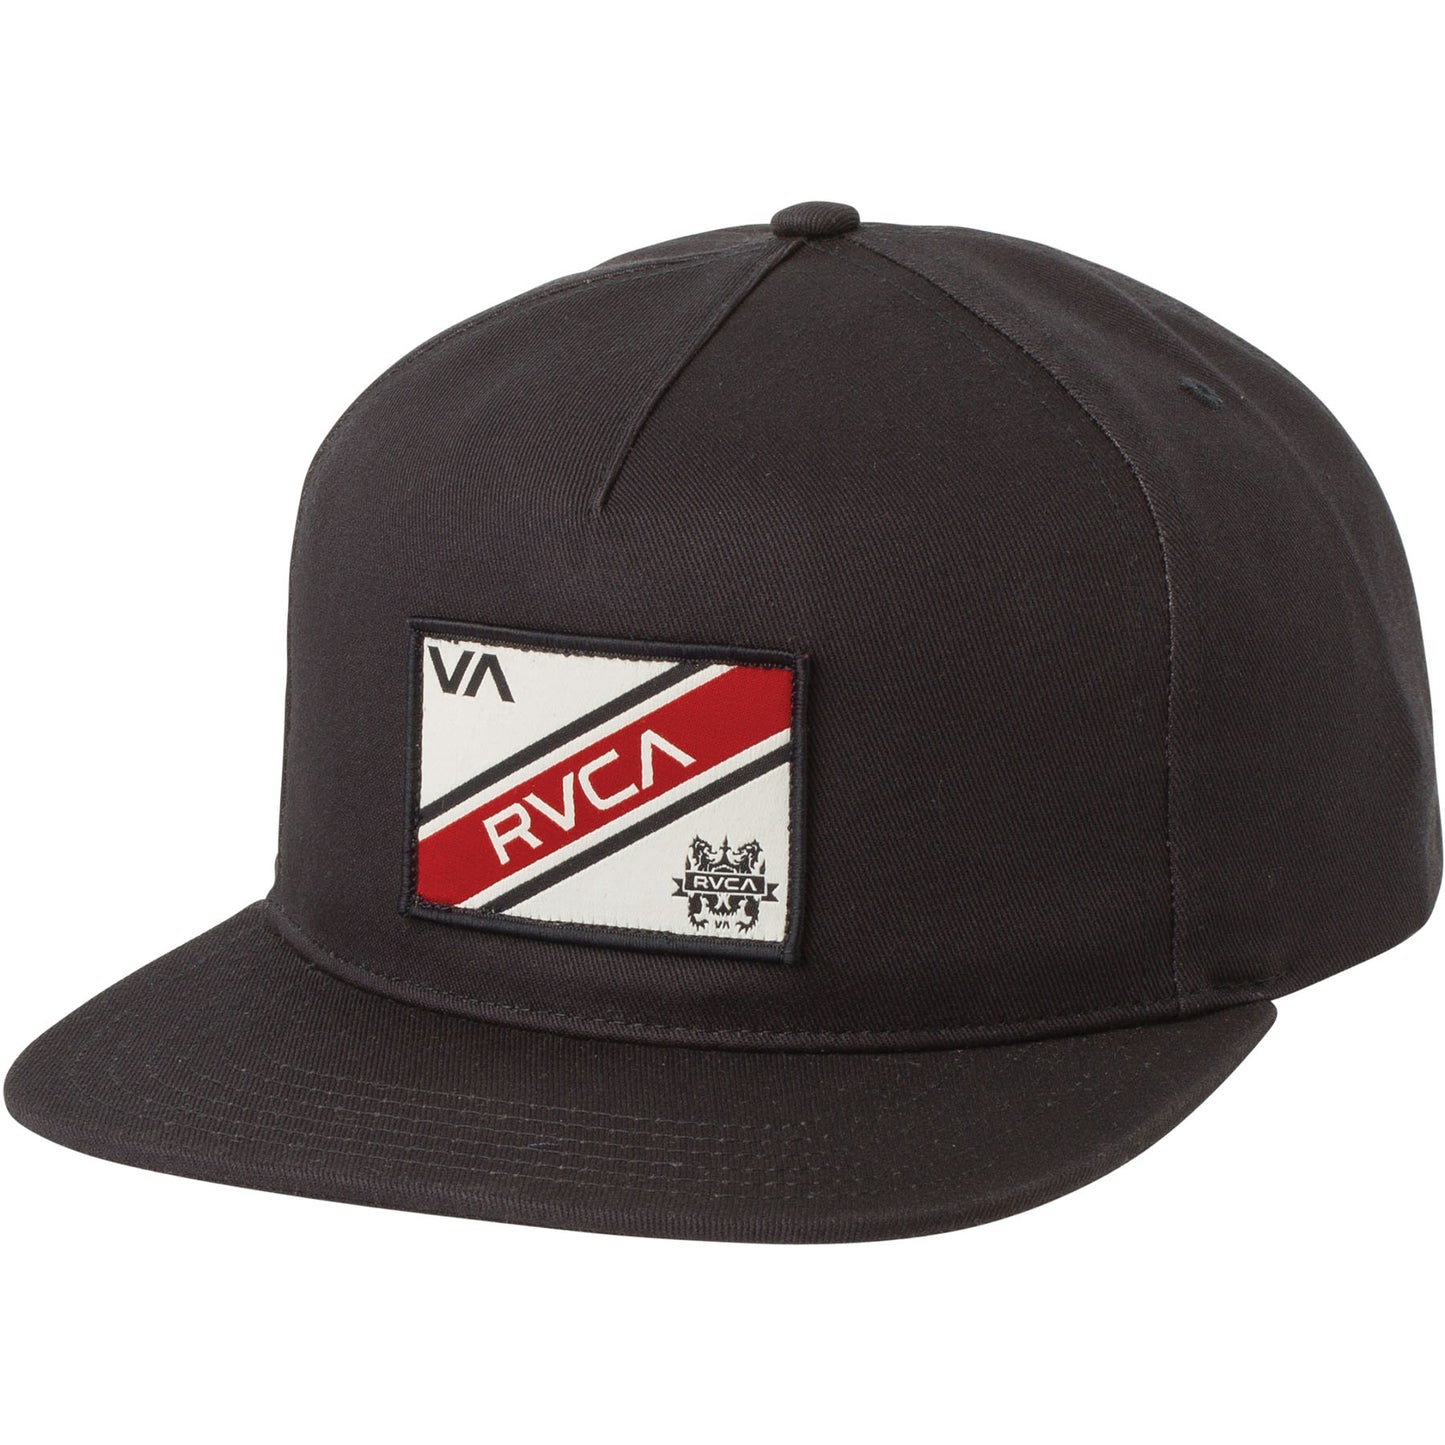 CASQUETTE PLACES SNAPBACK NAVY